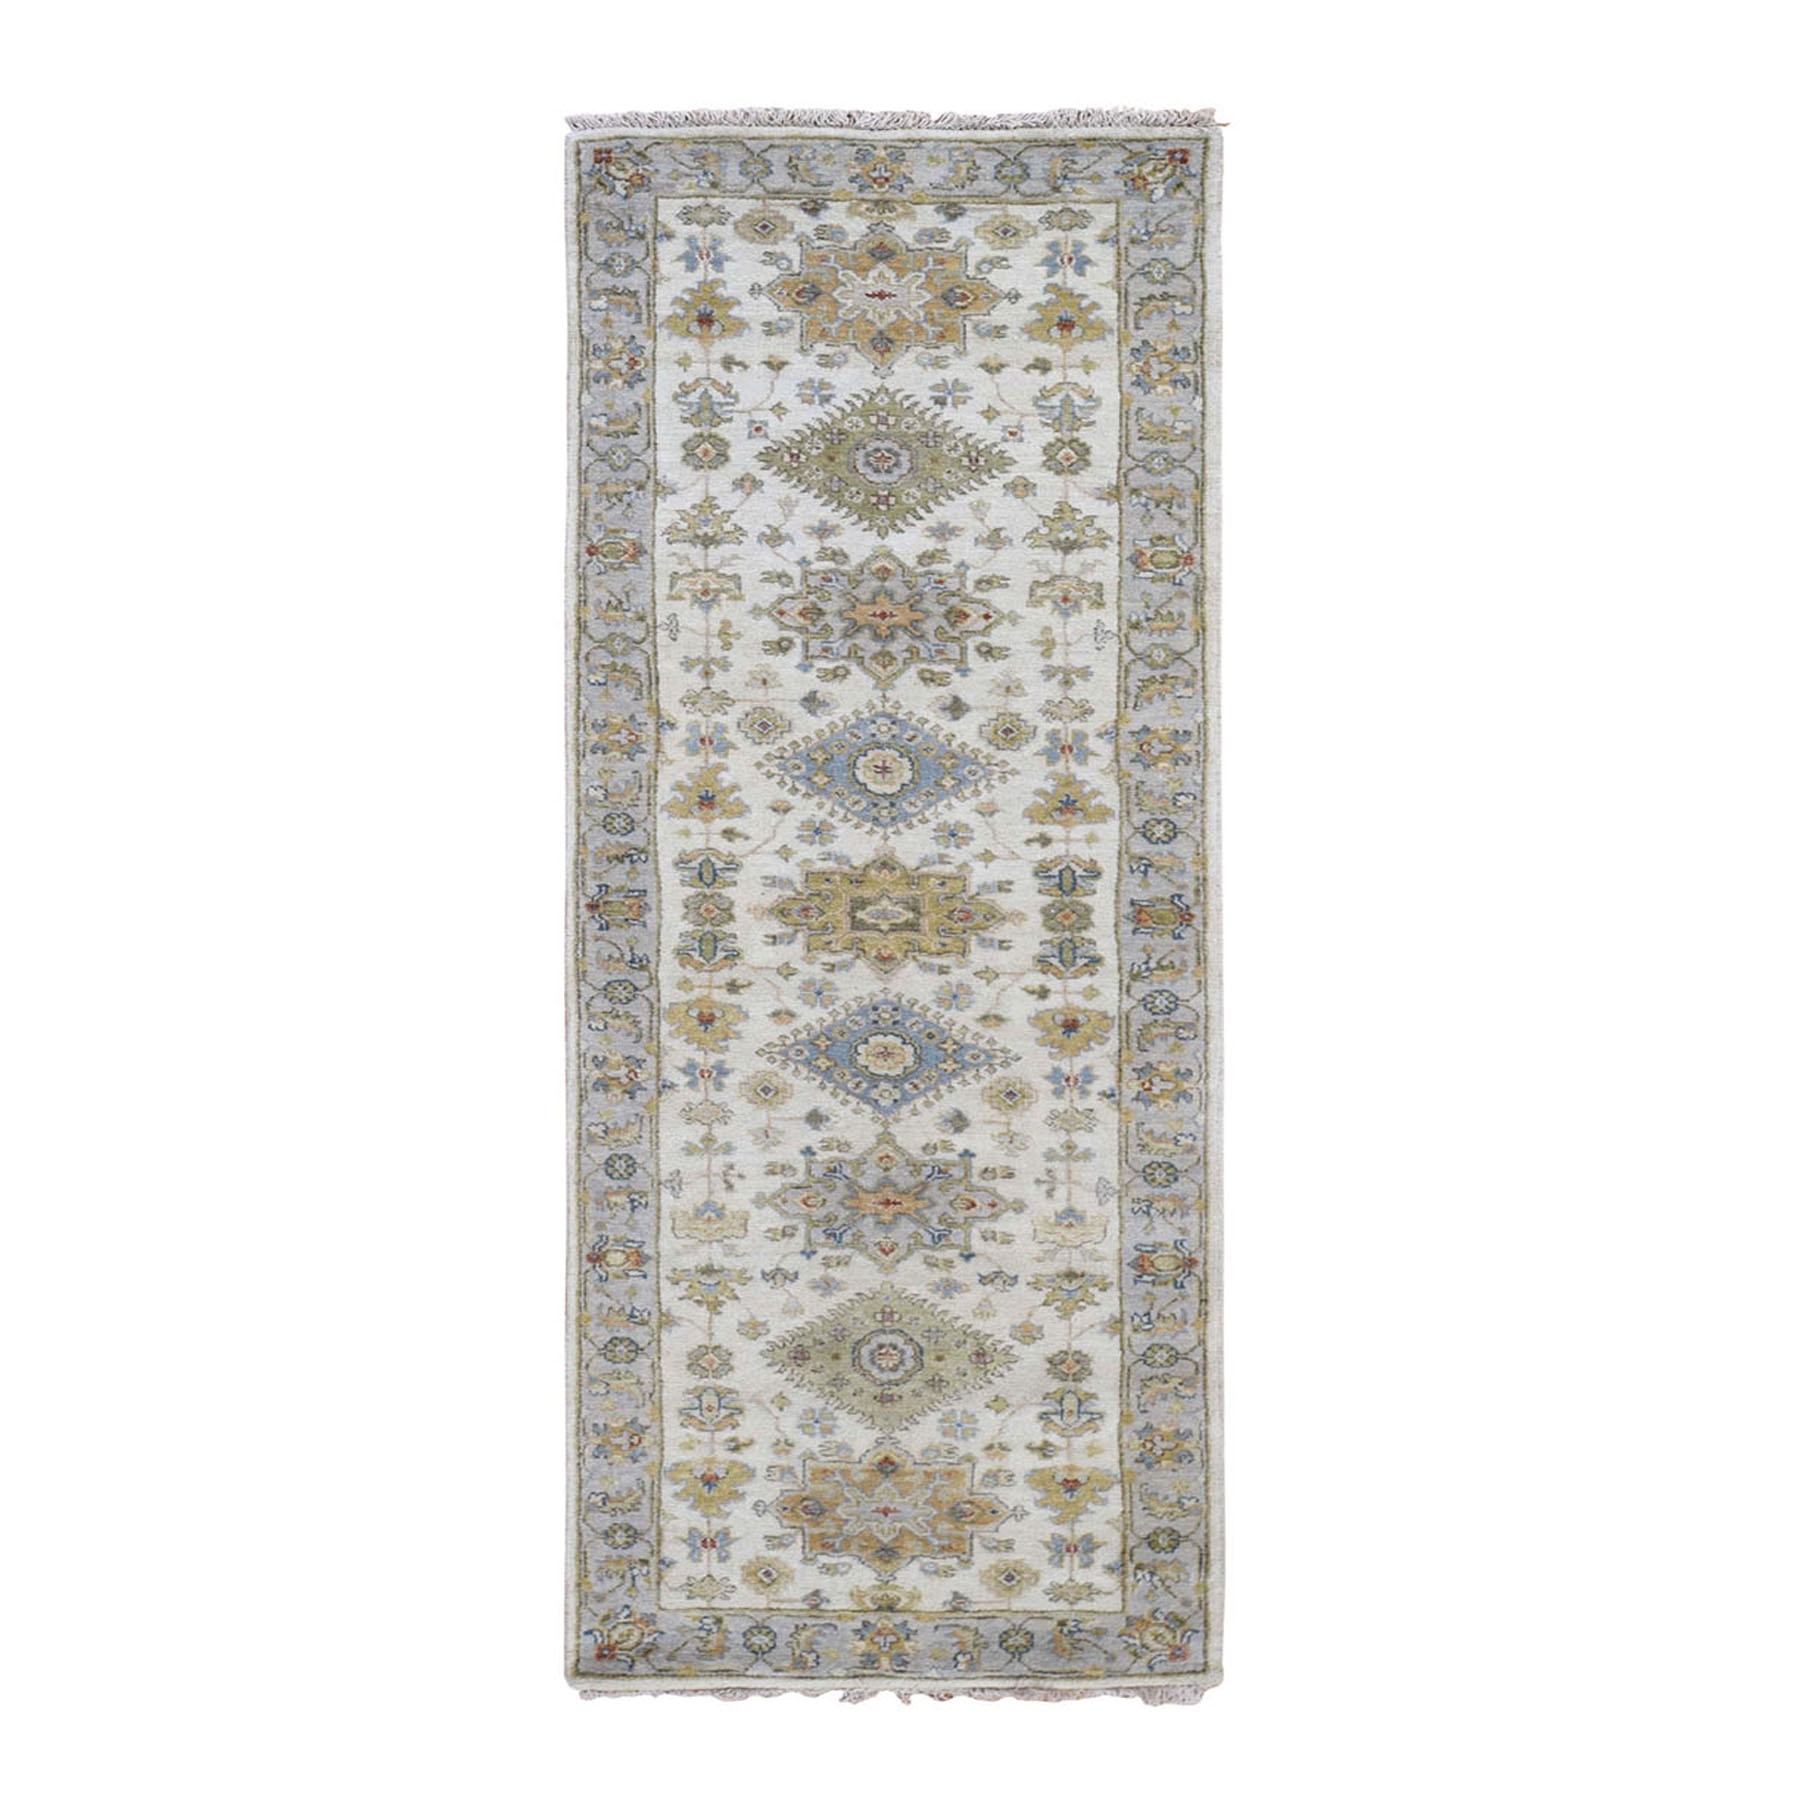 2'7"X8' Ivory Pure Wool Geometric Design Runner Hand Knotted Tribal Rug moad889c